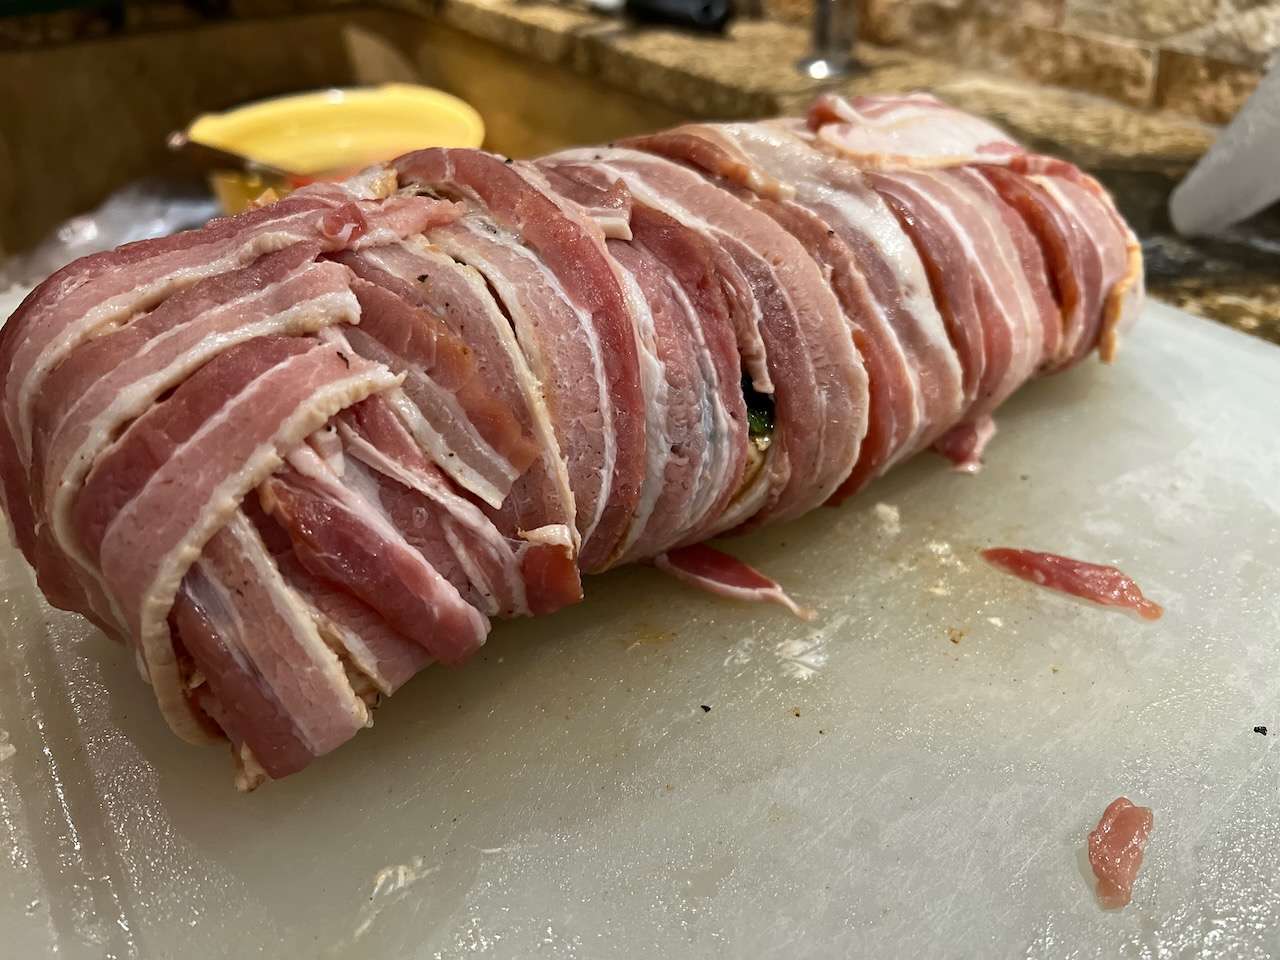 Bacon wrapped stuffed cream cheese and jalapeno pork loin.